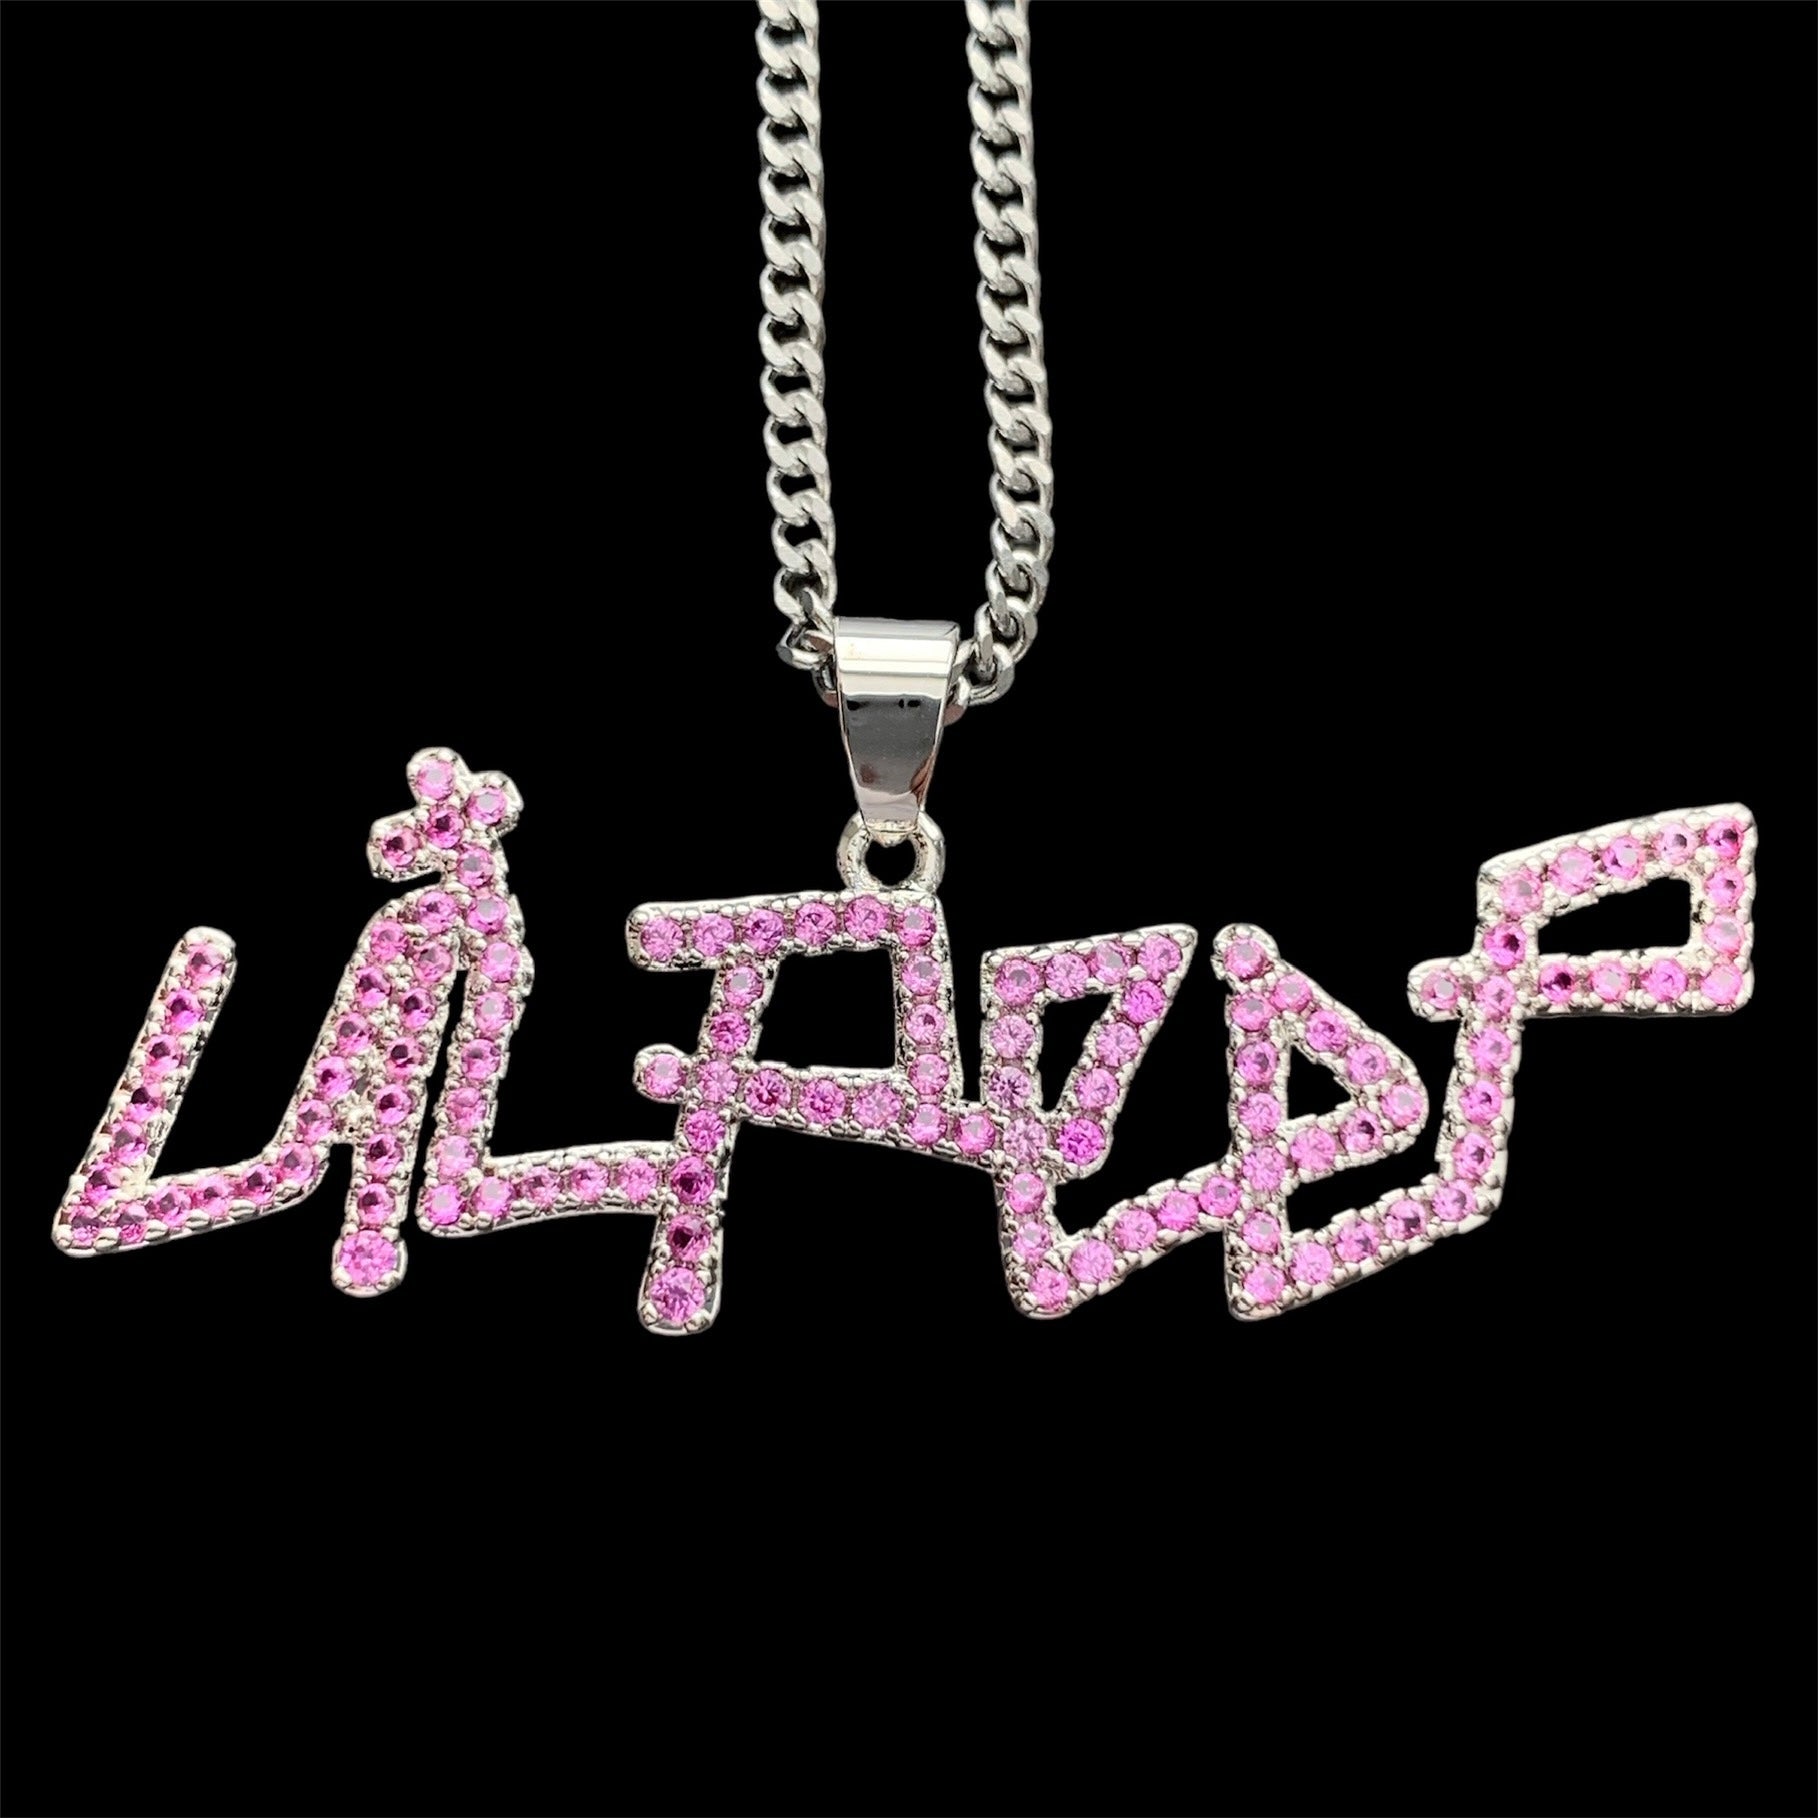 Lil Peep GBC Necklace Polished Stainless Steel Pendant Choice of Chain  gustav Ahr Hellboy Crybaby Gothboiclique Trap Goose - Etsy